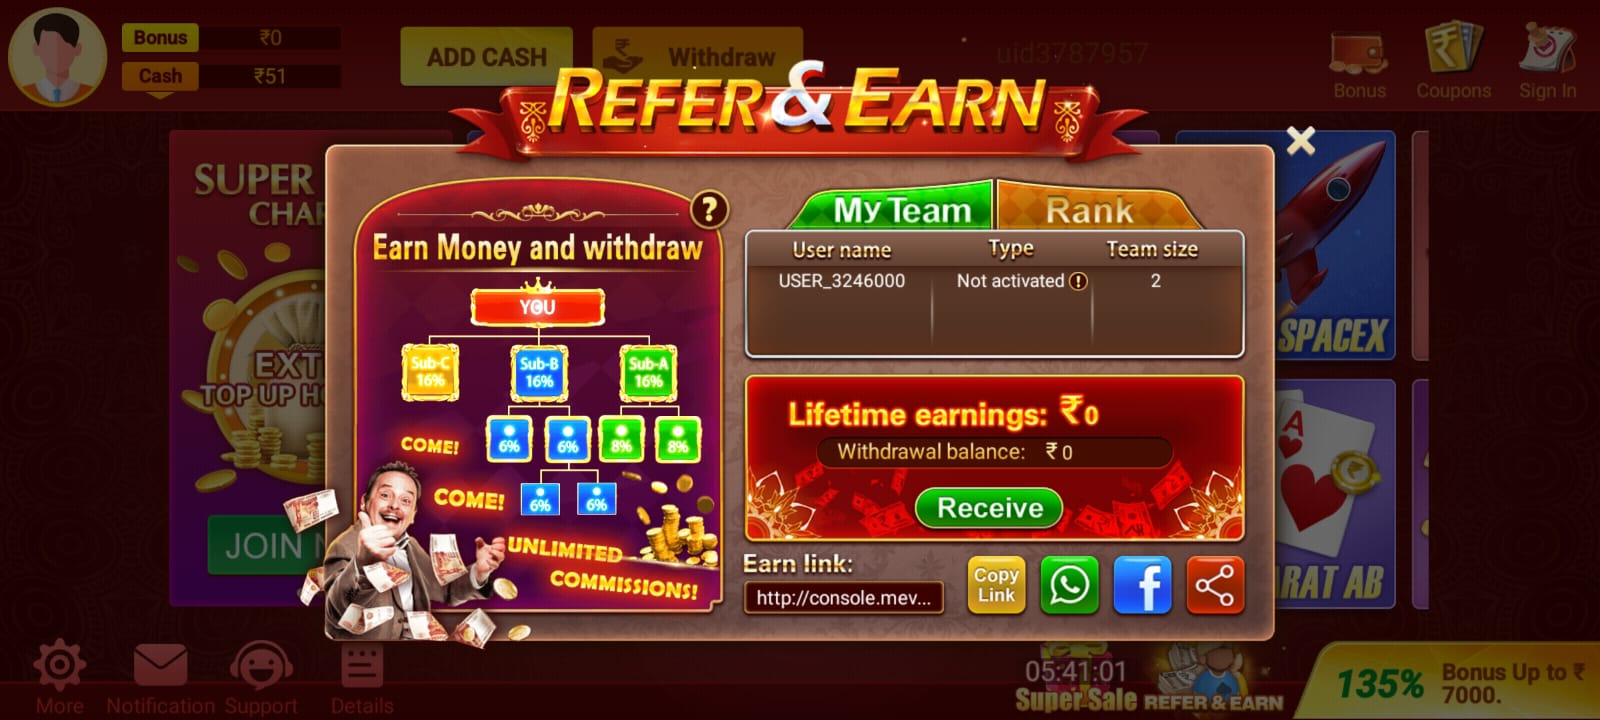 Get 99Rs- Poker Master Casino apk Download & Live Payment Proof